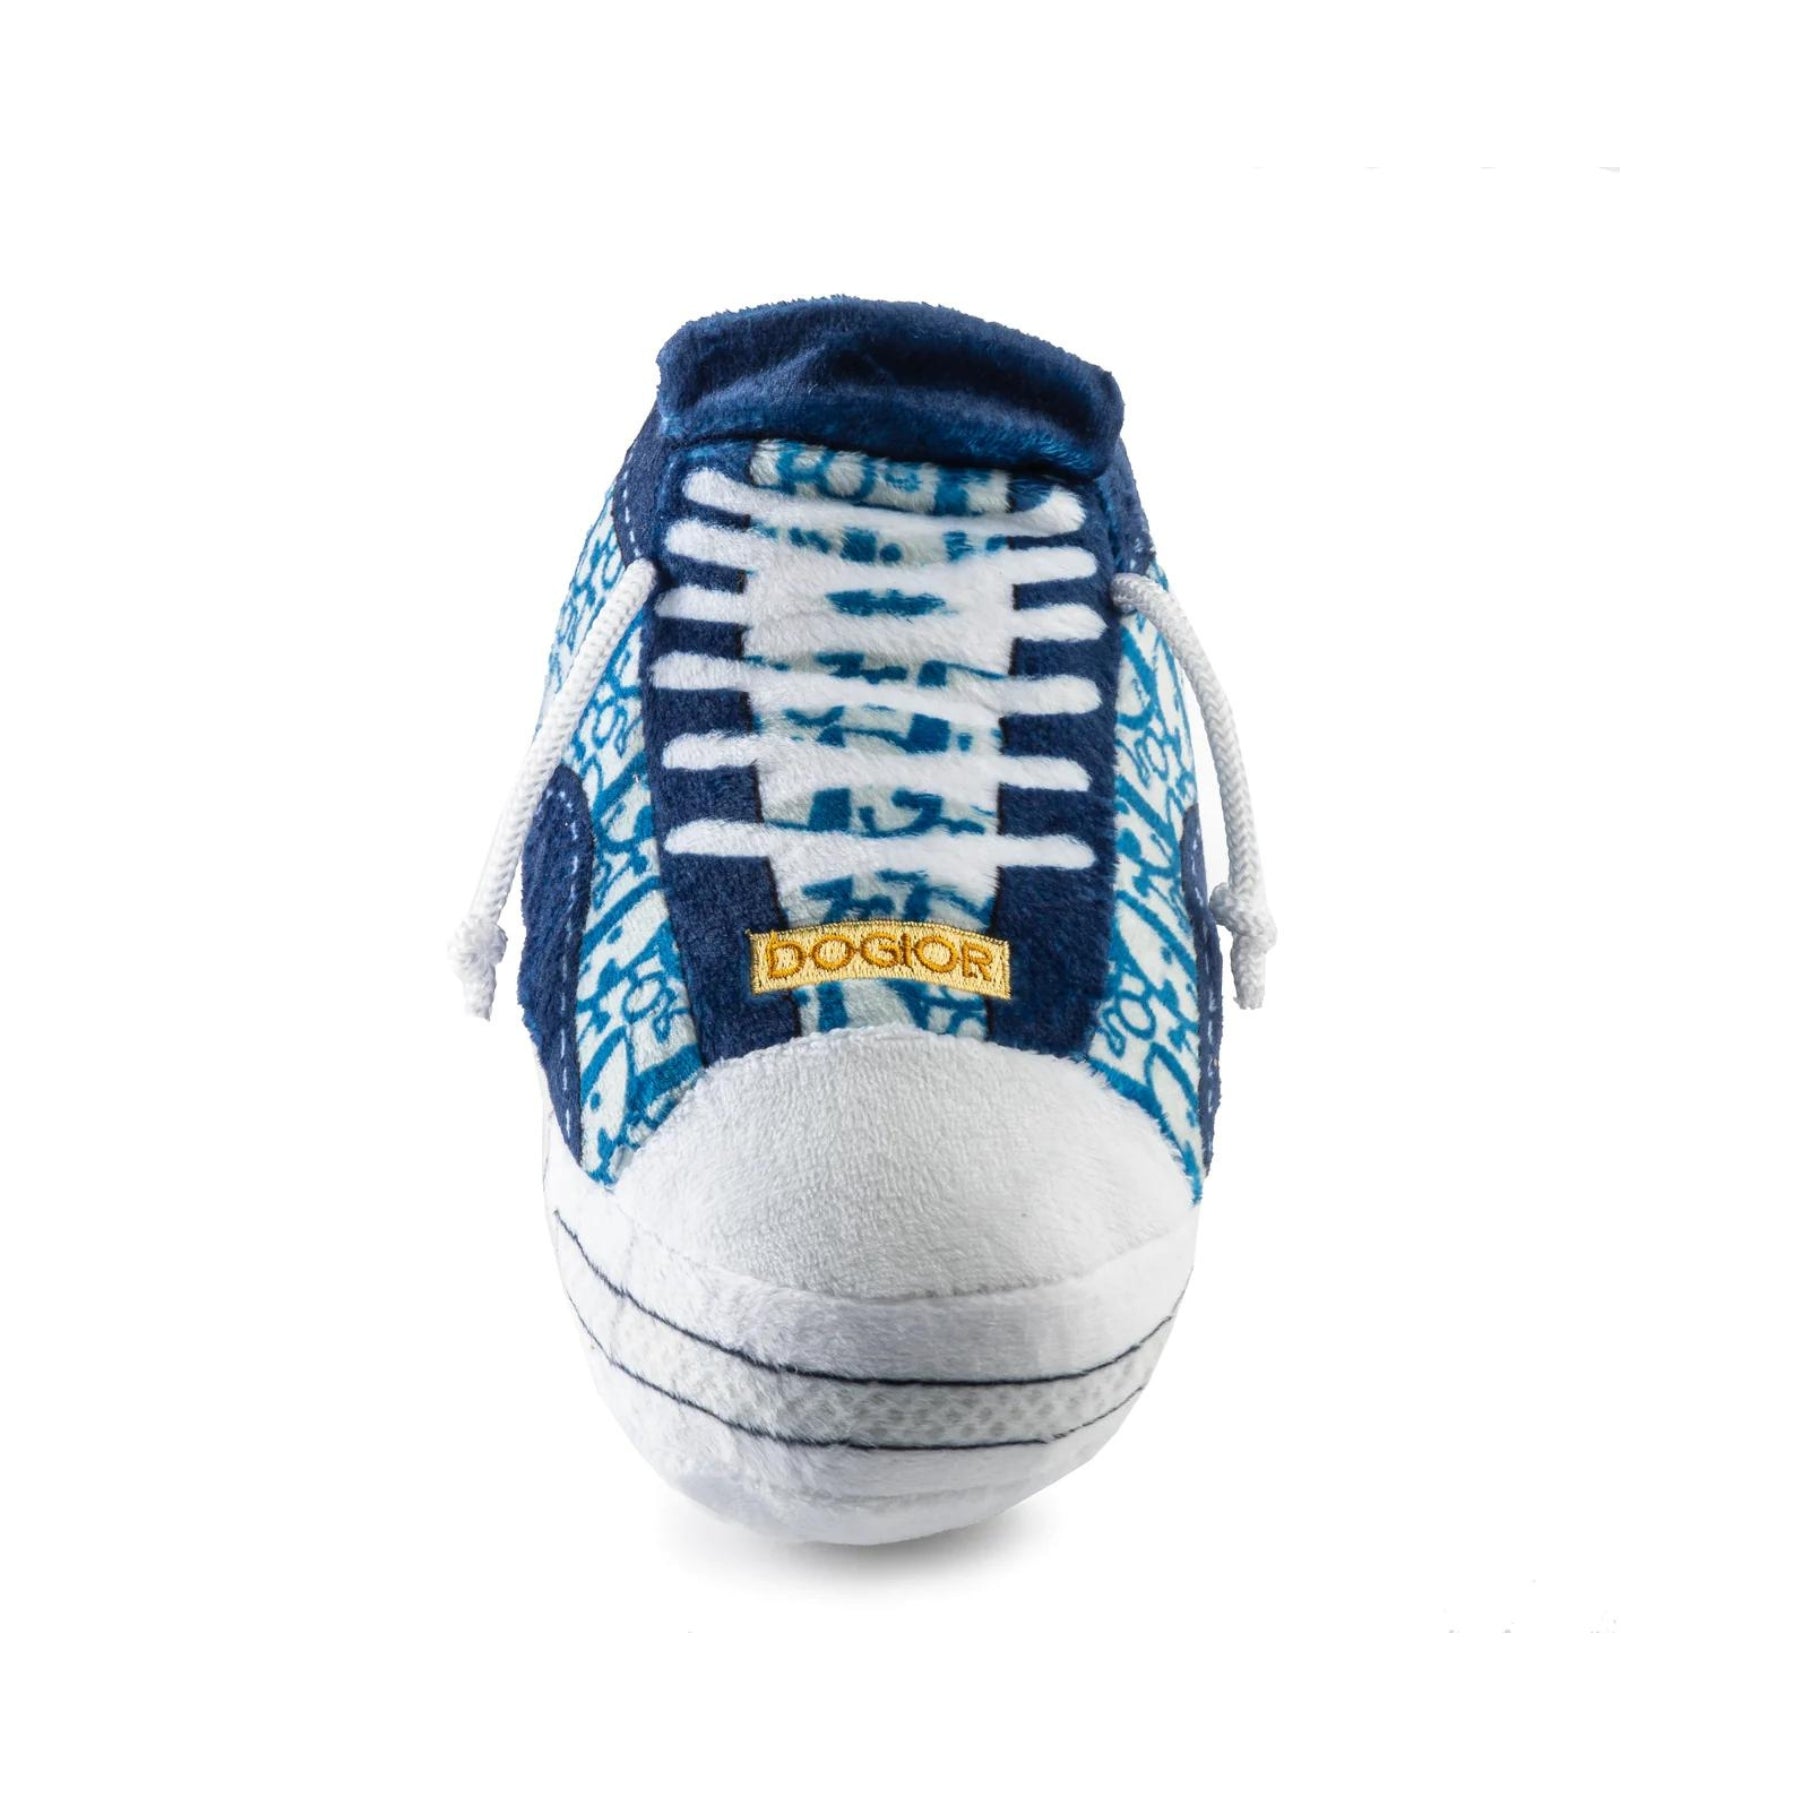 Dogior High-Top Tennis Shoe - Pooch Luxury